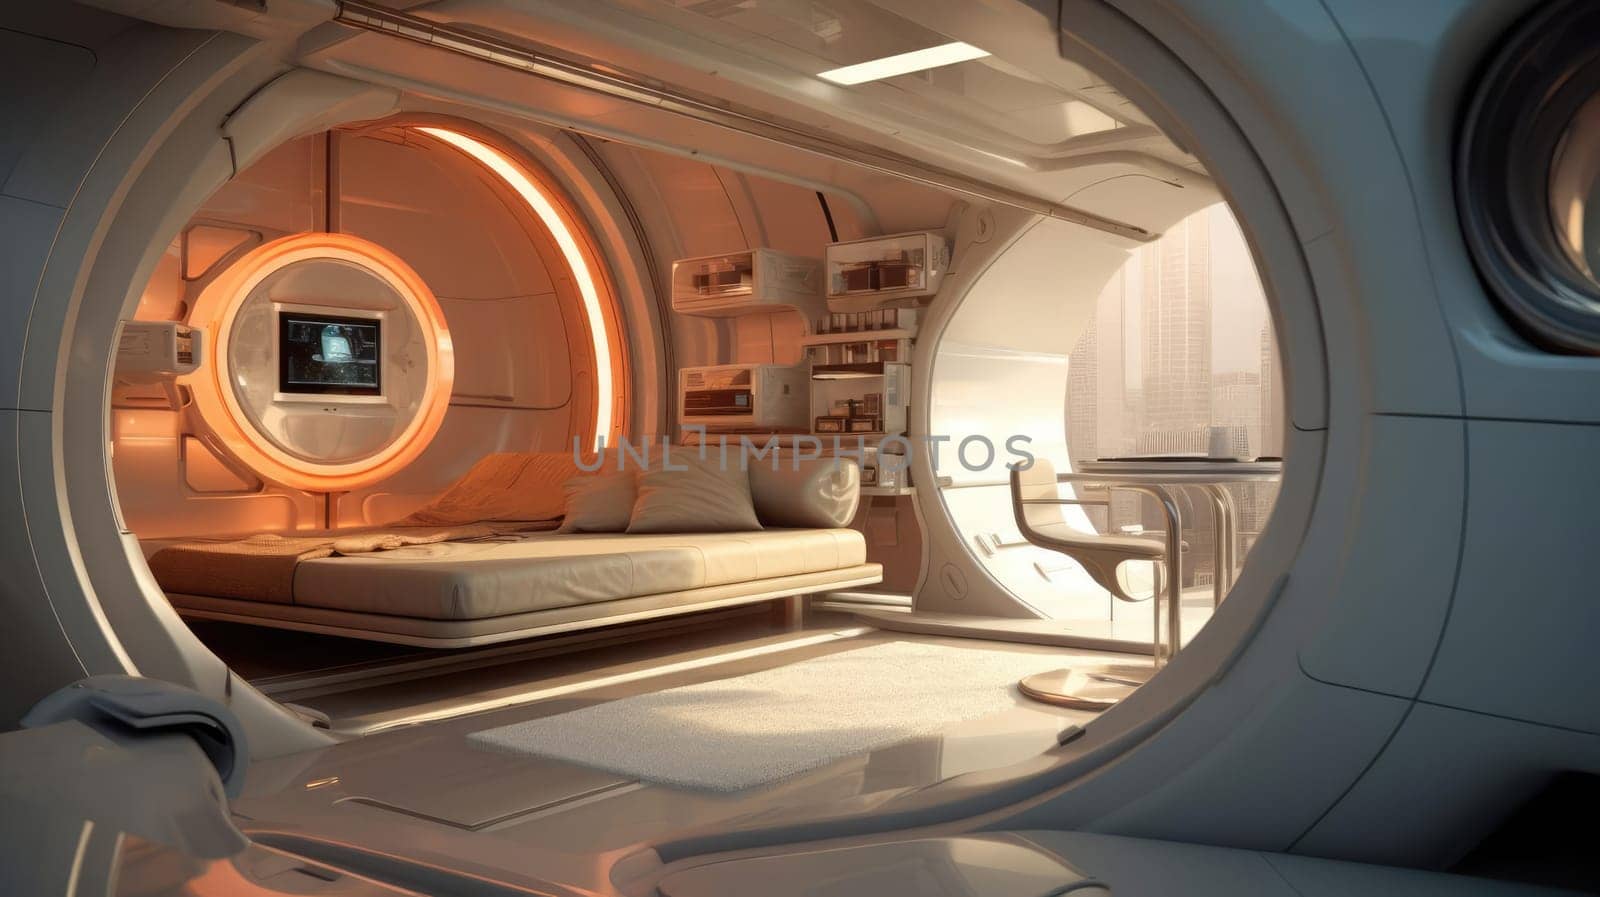 The apartment is capsule type, high technology. The architecture of the future